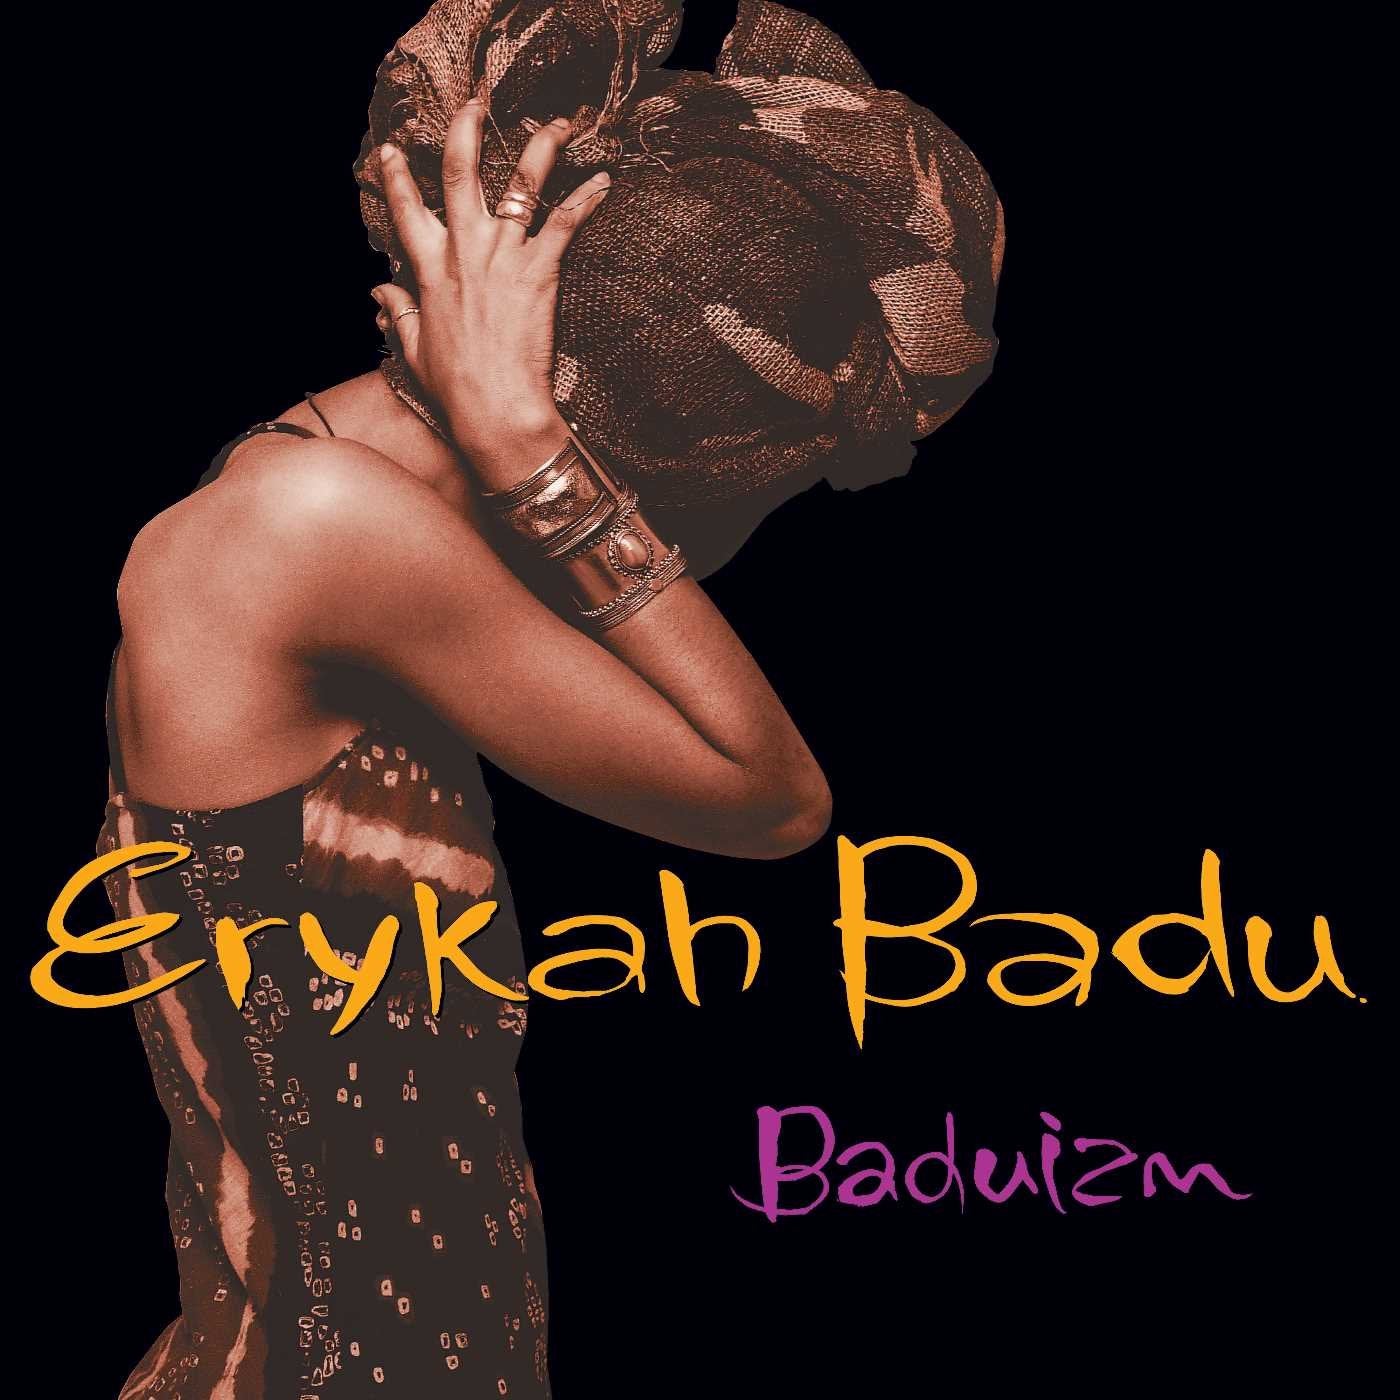 Erykah Badu On The 25th Anniversary Of ‘Baduizm’ And The Moment She Knew ‘Okay, This Is Something’